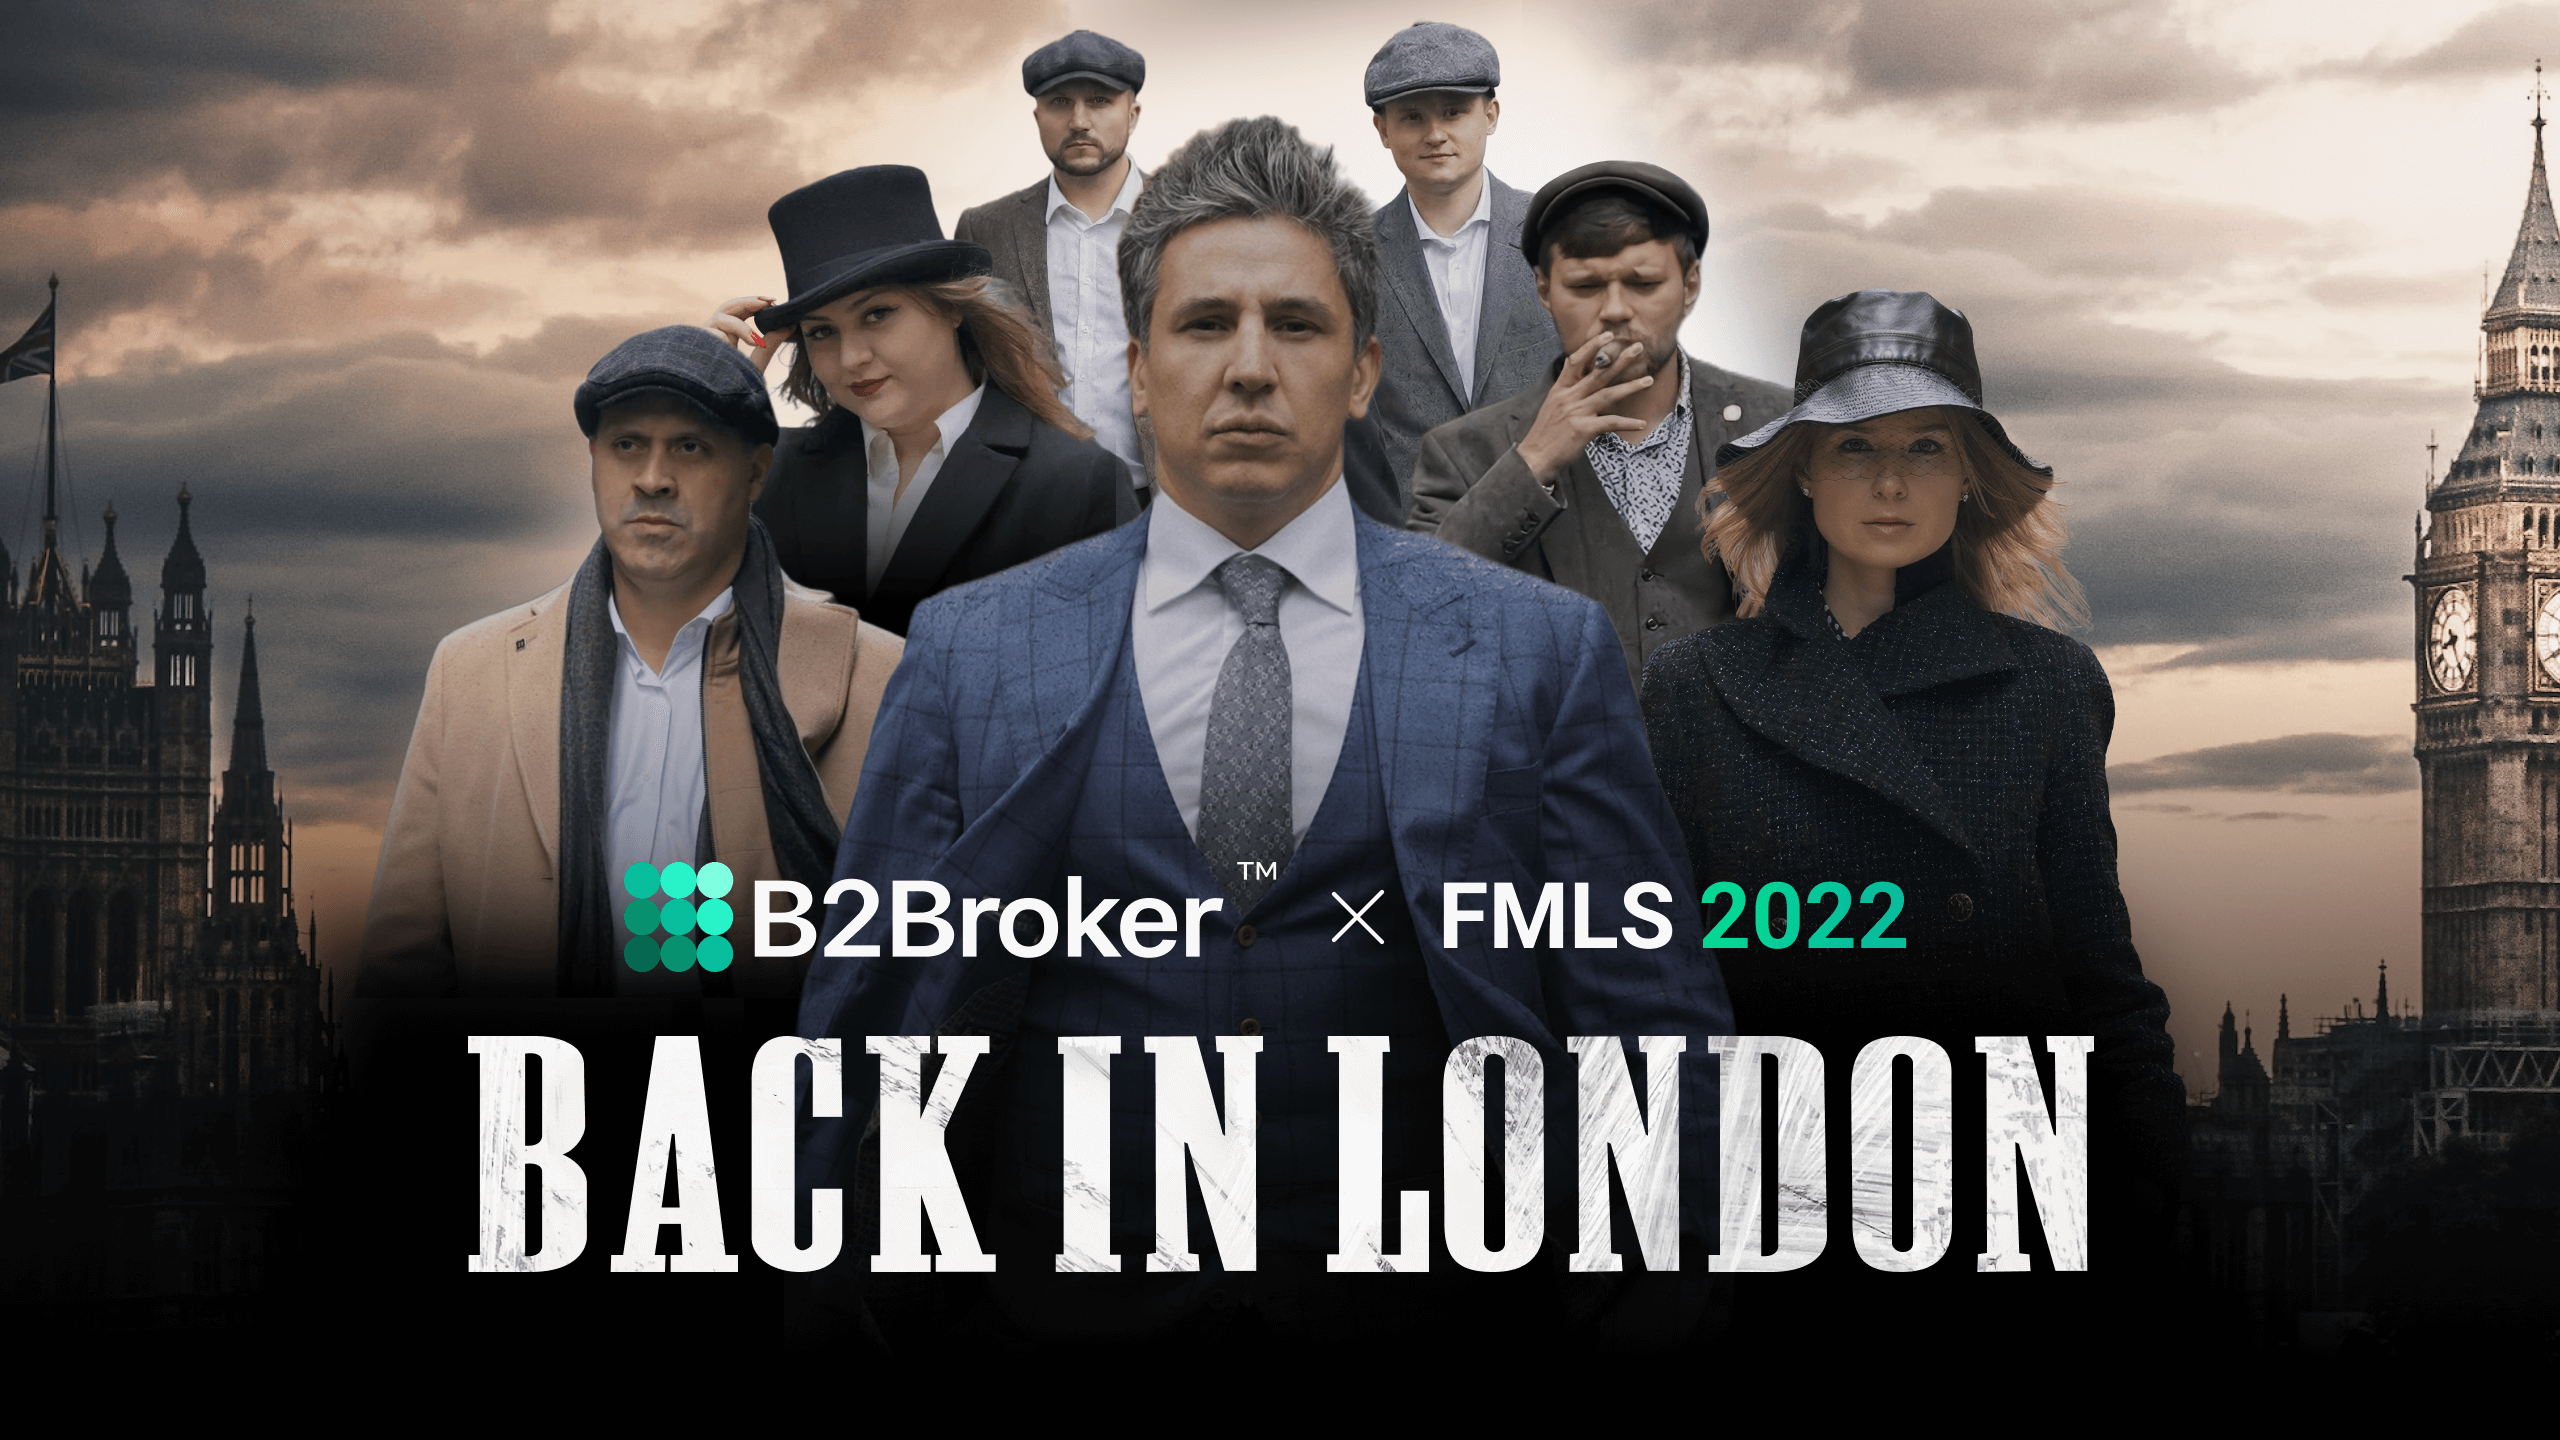 B2Broker Team is Back in London at the FMLS 2022